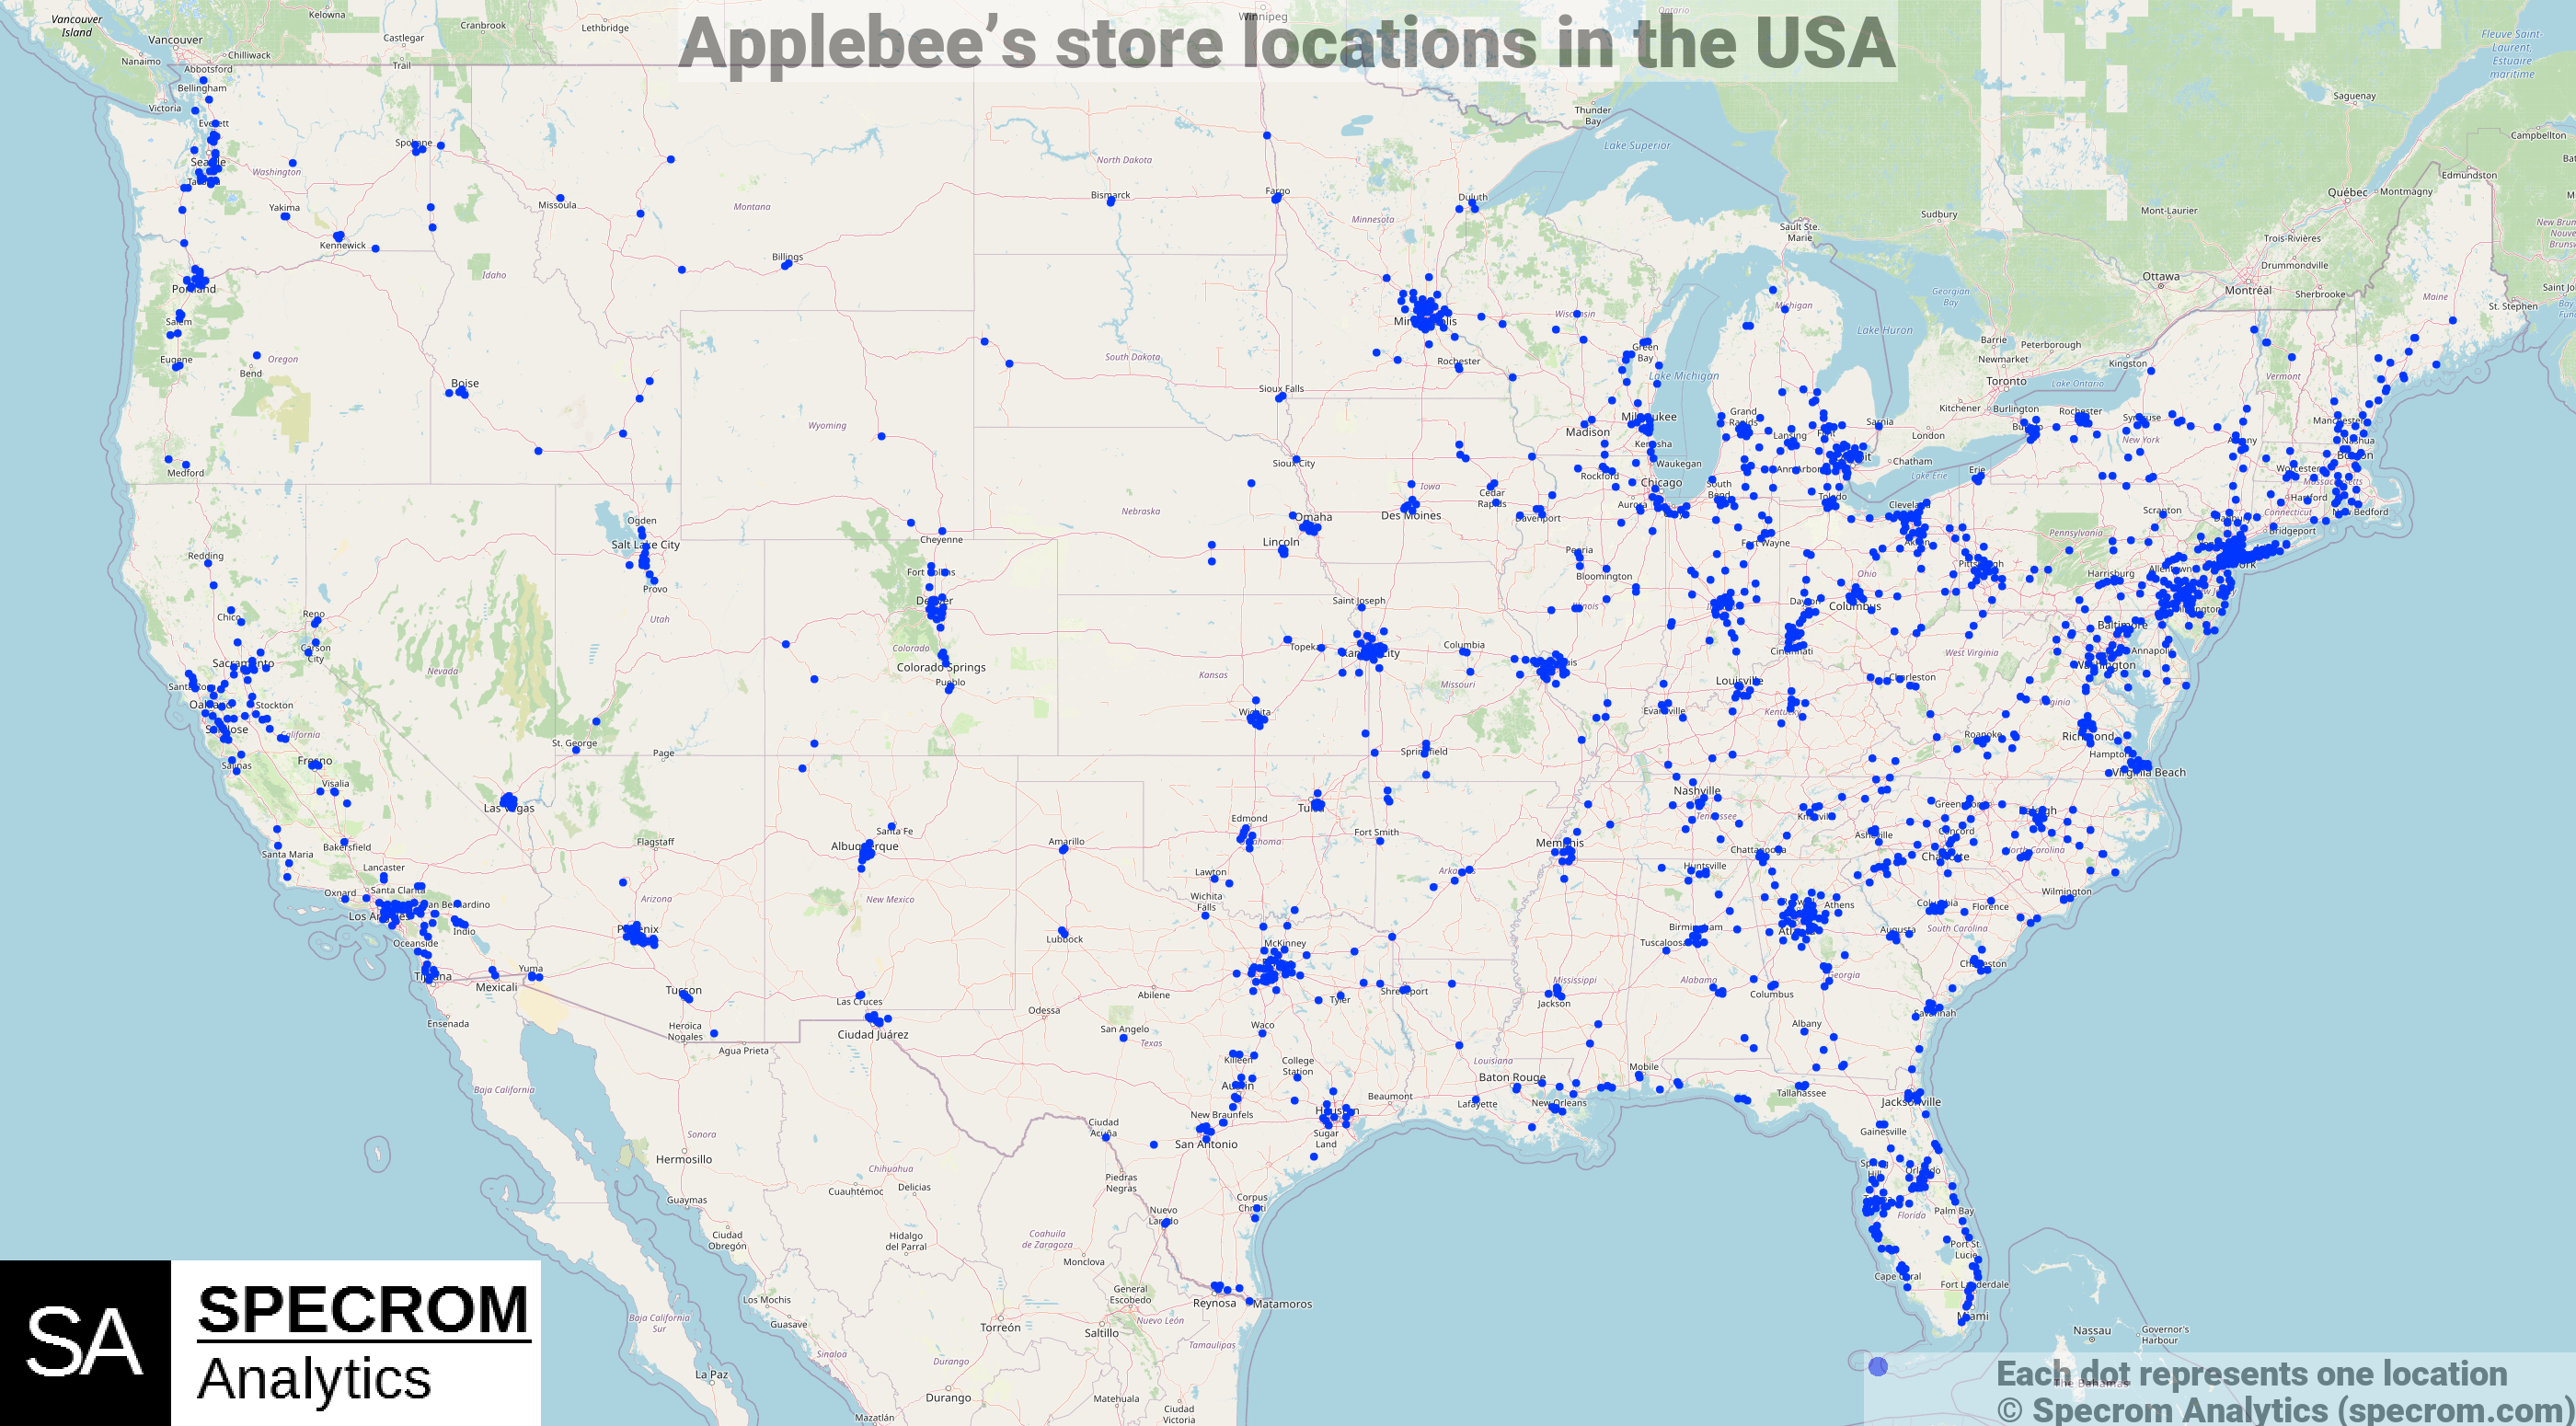 Applebee's store locations in the USA